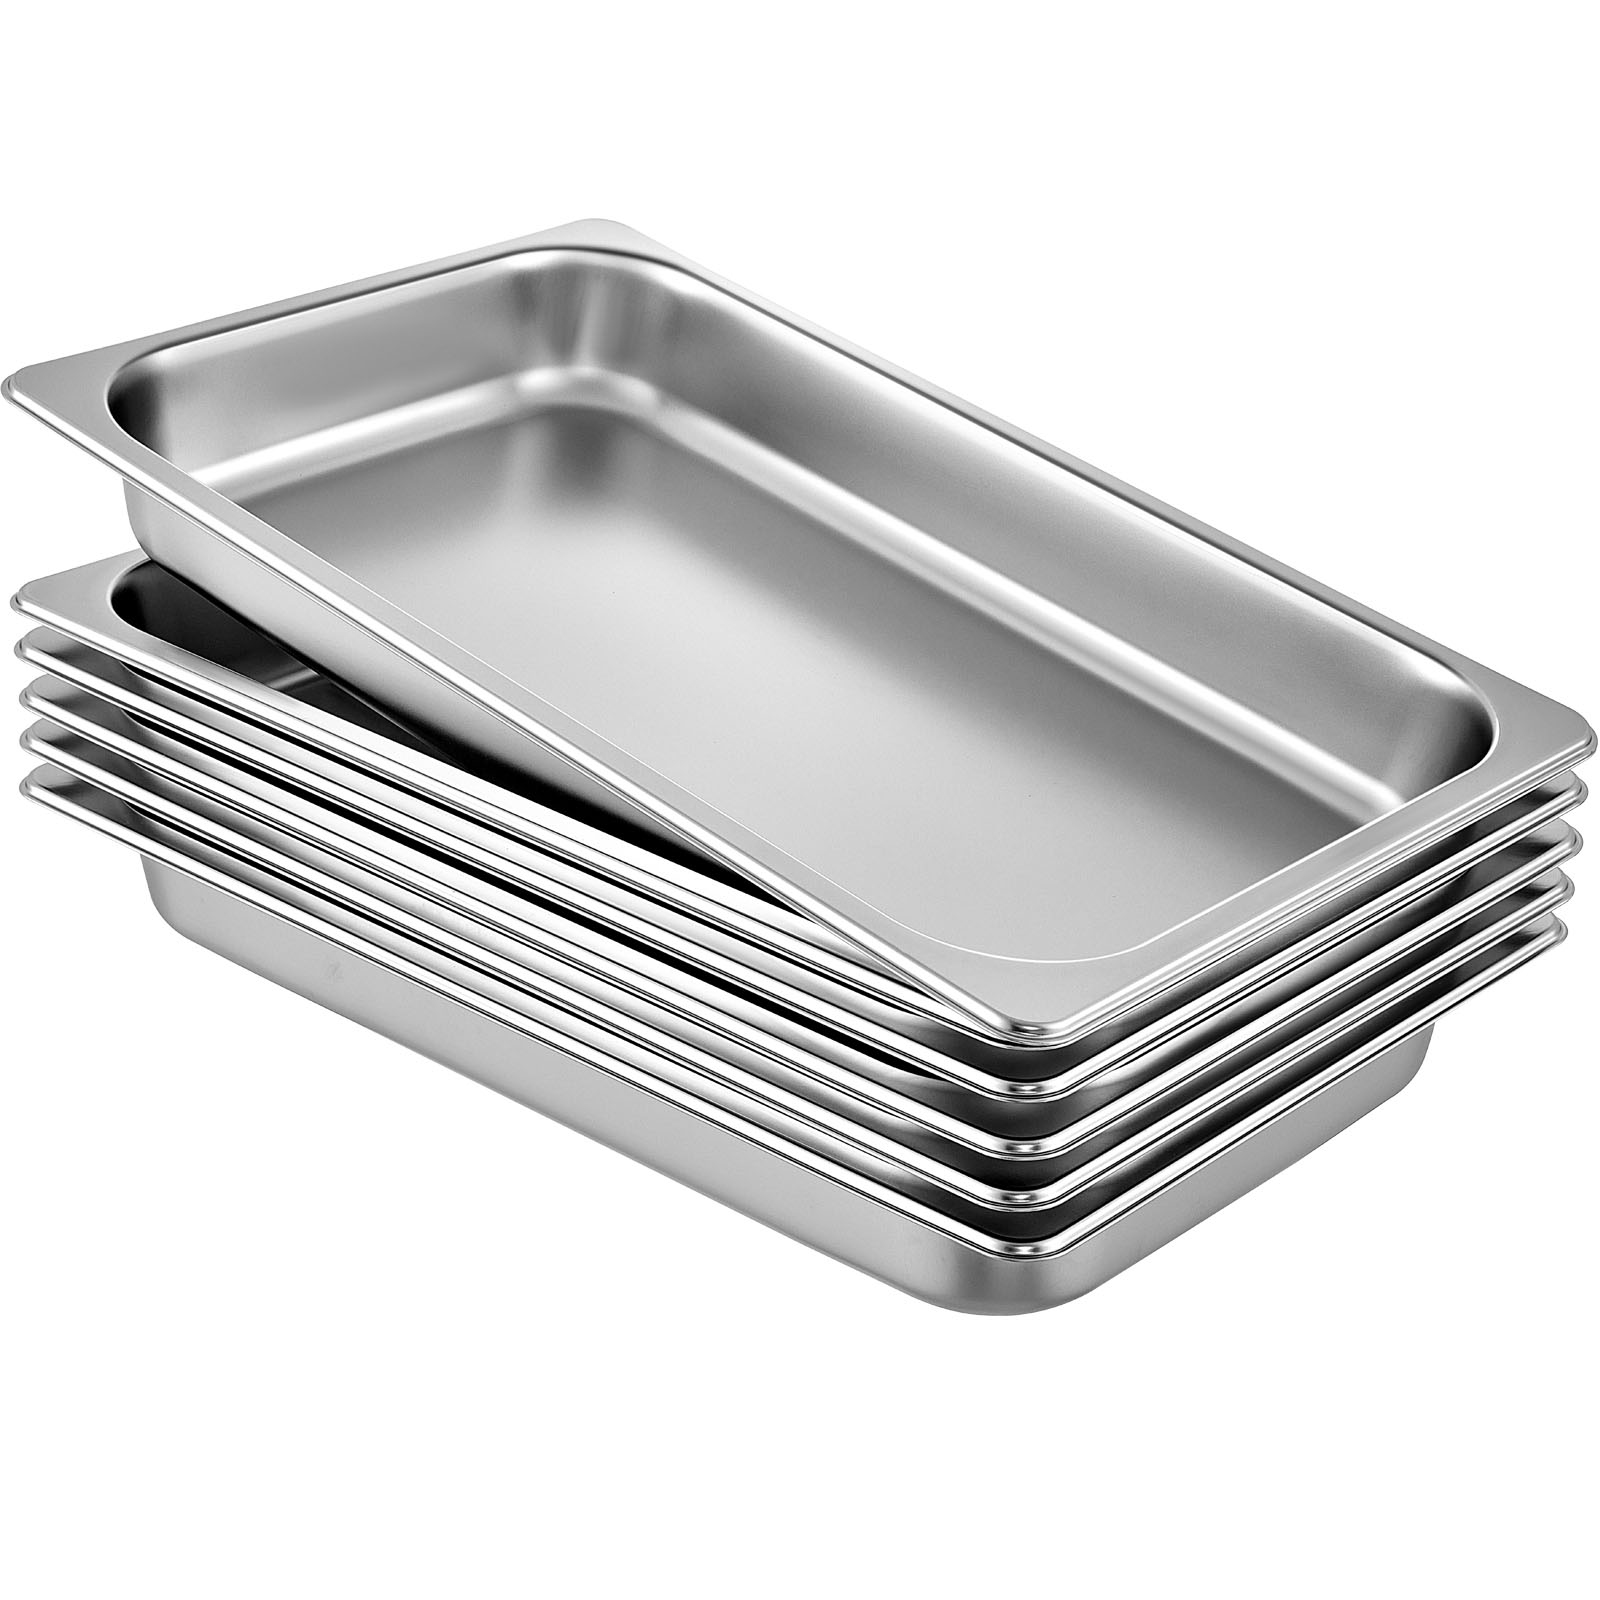 6 Pack Full Size 2" Deep Silver Stainless Steel Hotel Steam Table Pans от Vevor Many GEOs